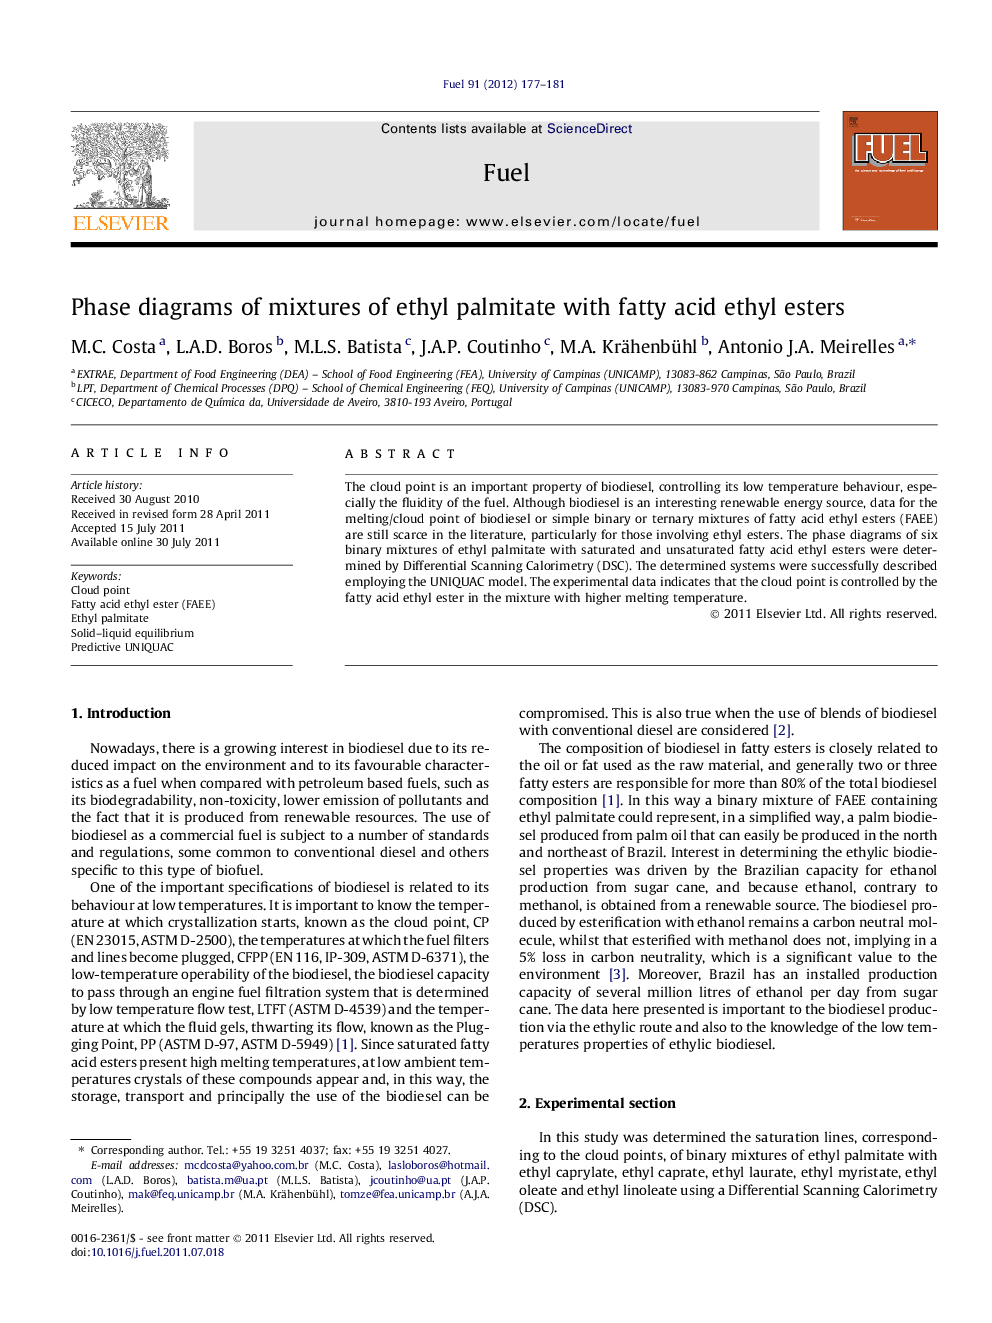 Phase diagrams of mixtures of ethyl palmitate with fatty acid ethyl esters